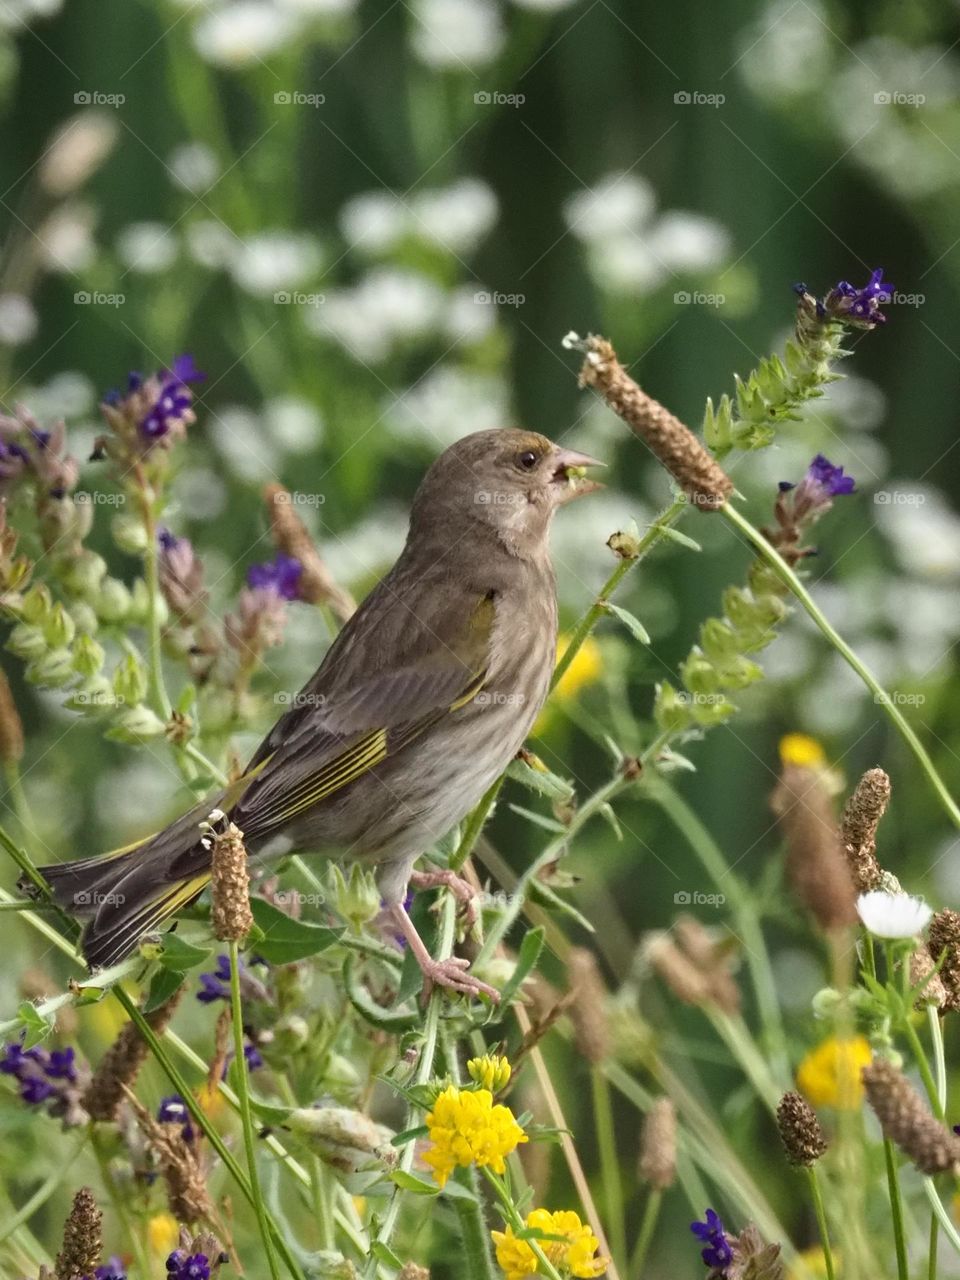 Greenfinch in the meadow